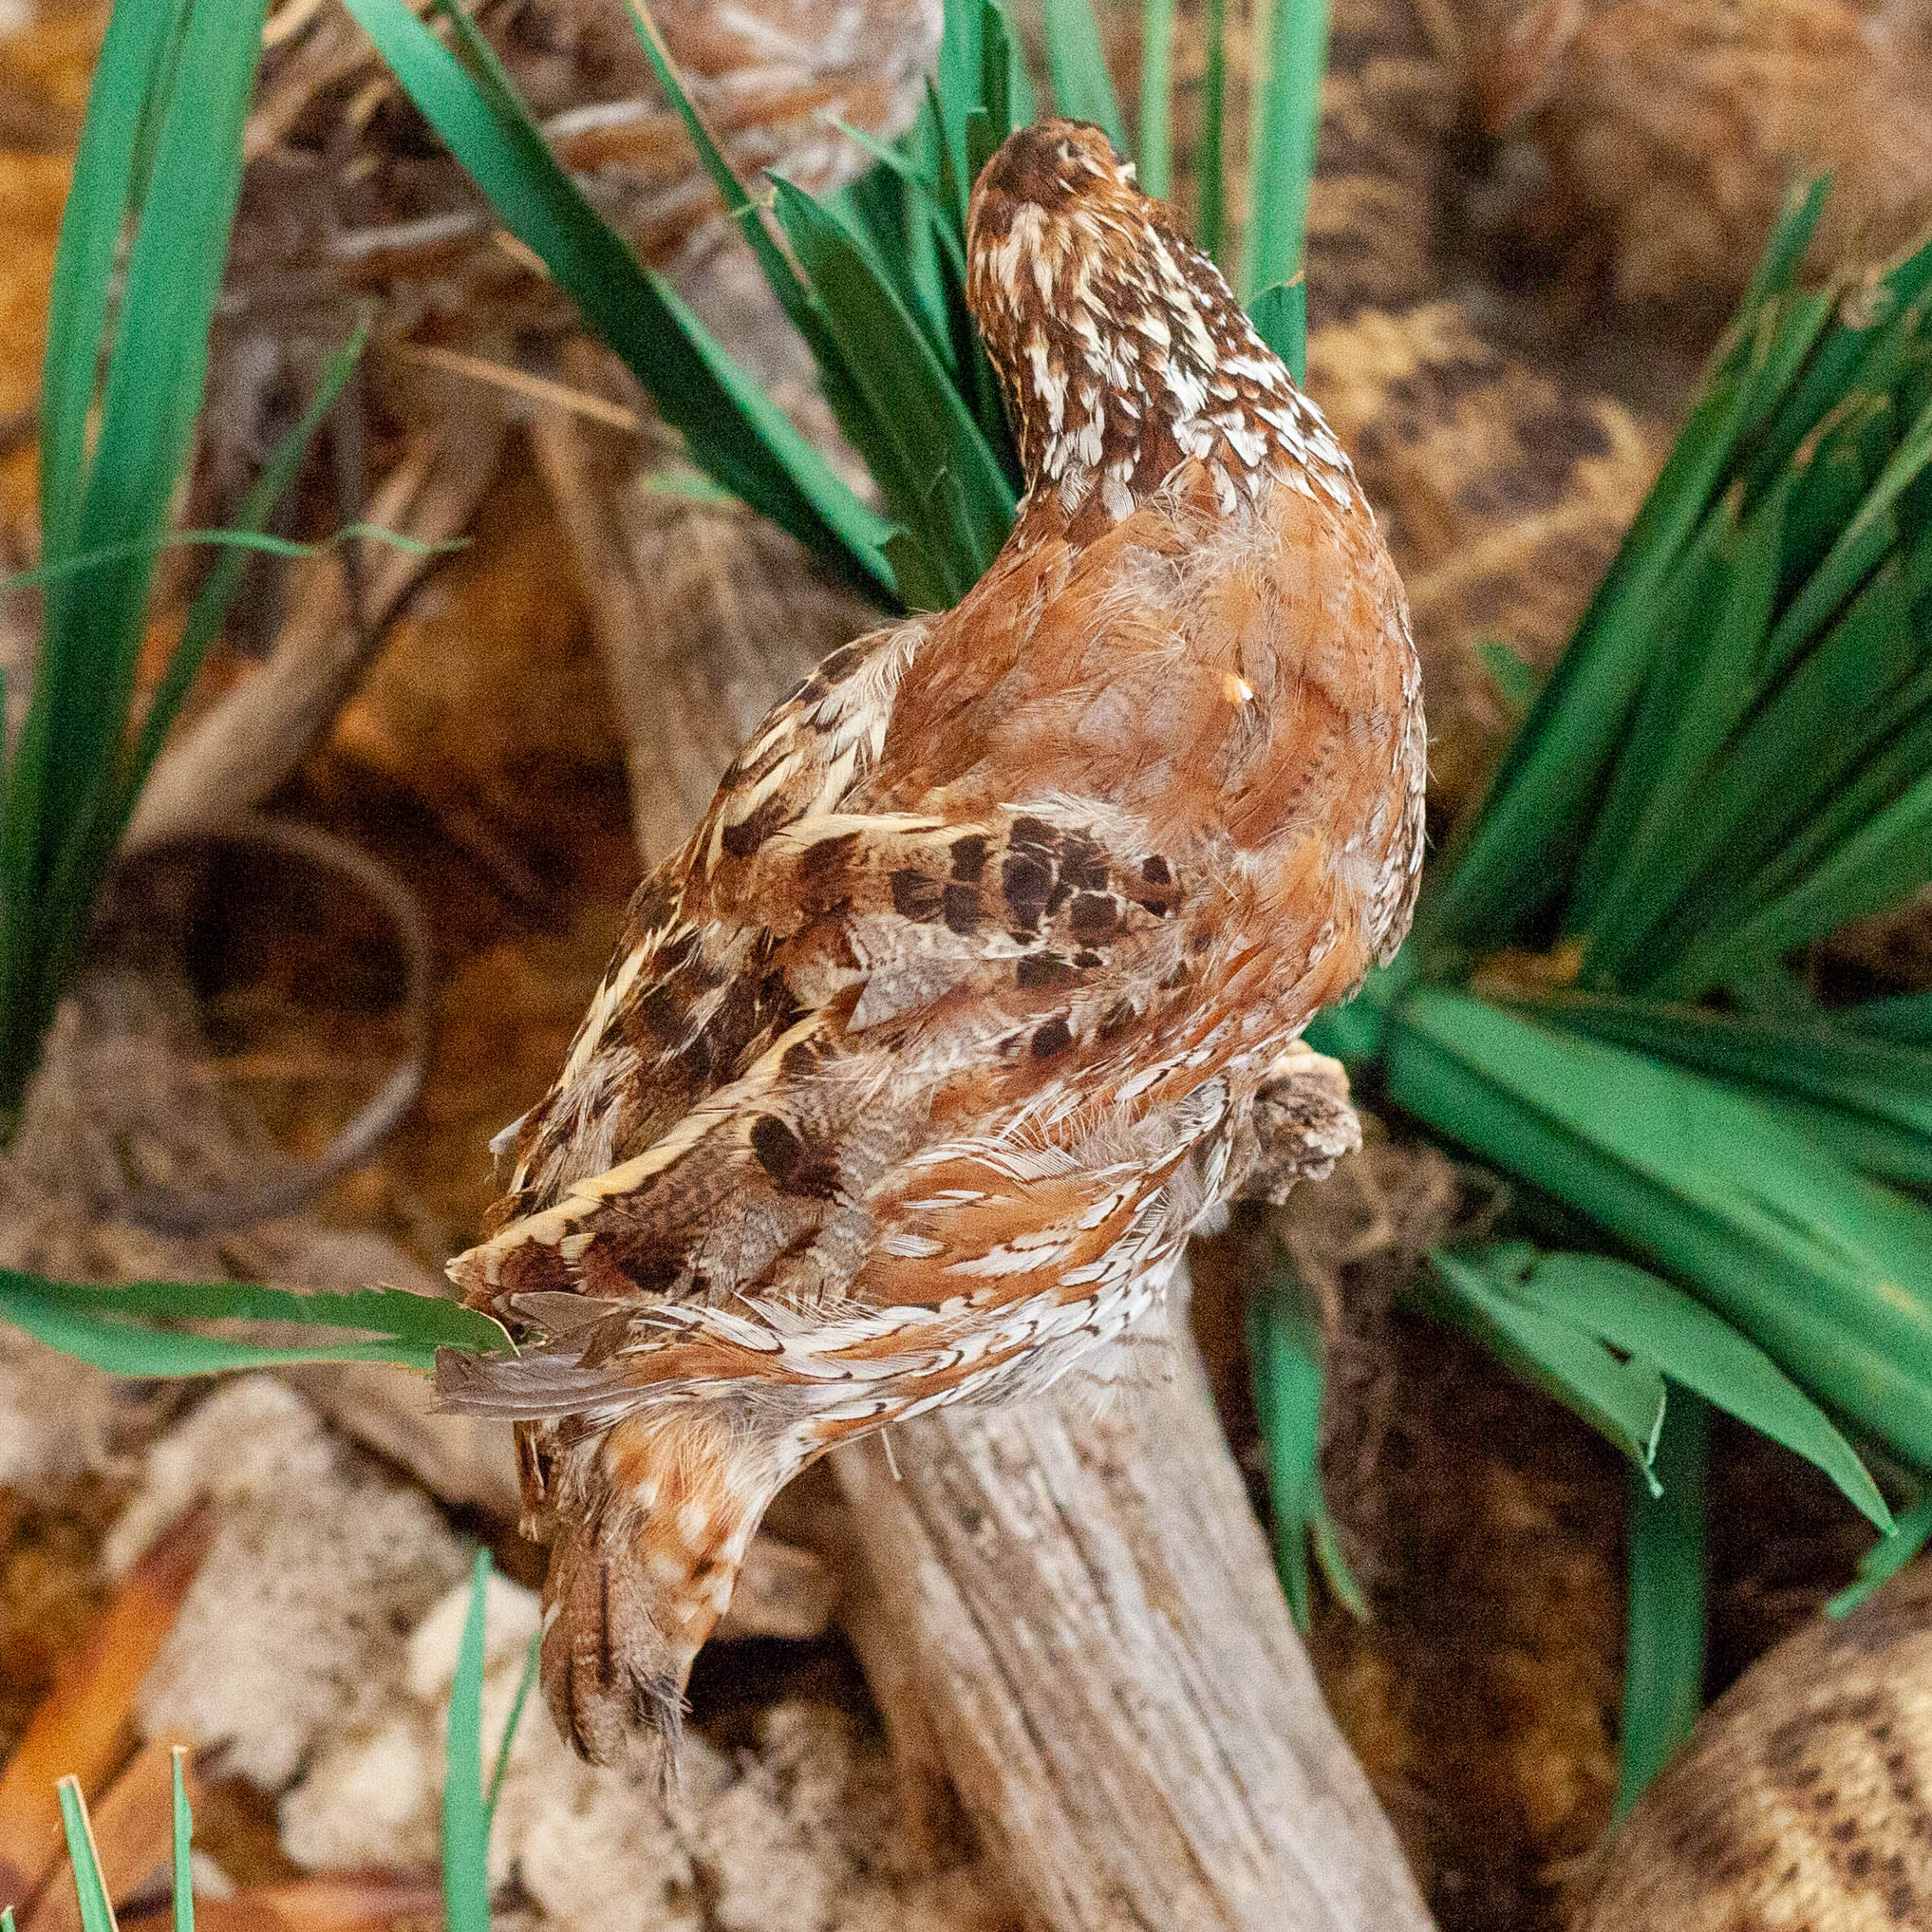 Large Quail Feather Image & Photo (Free Trial)